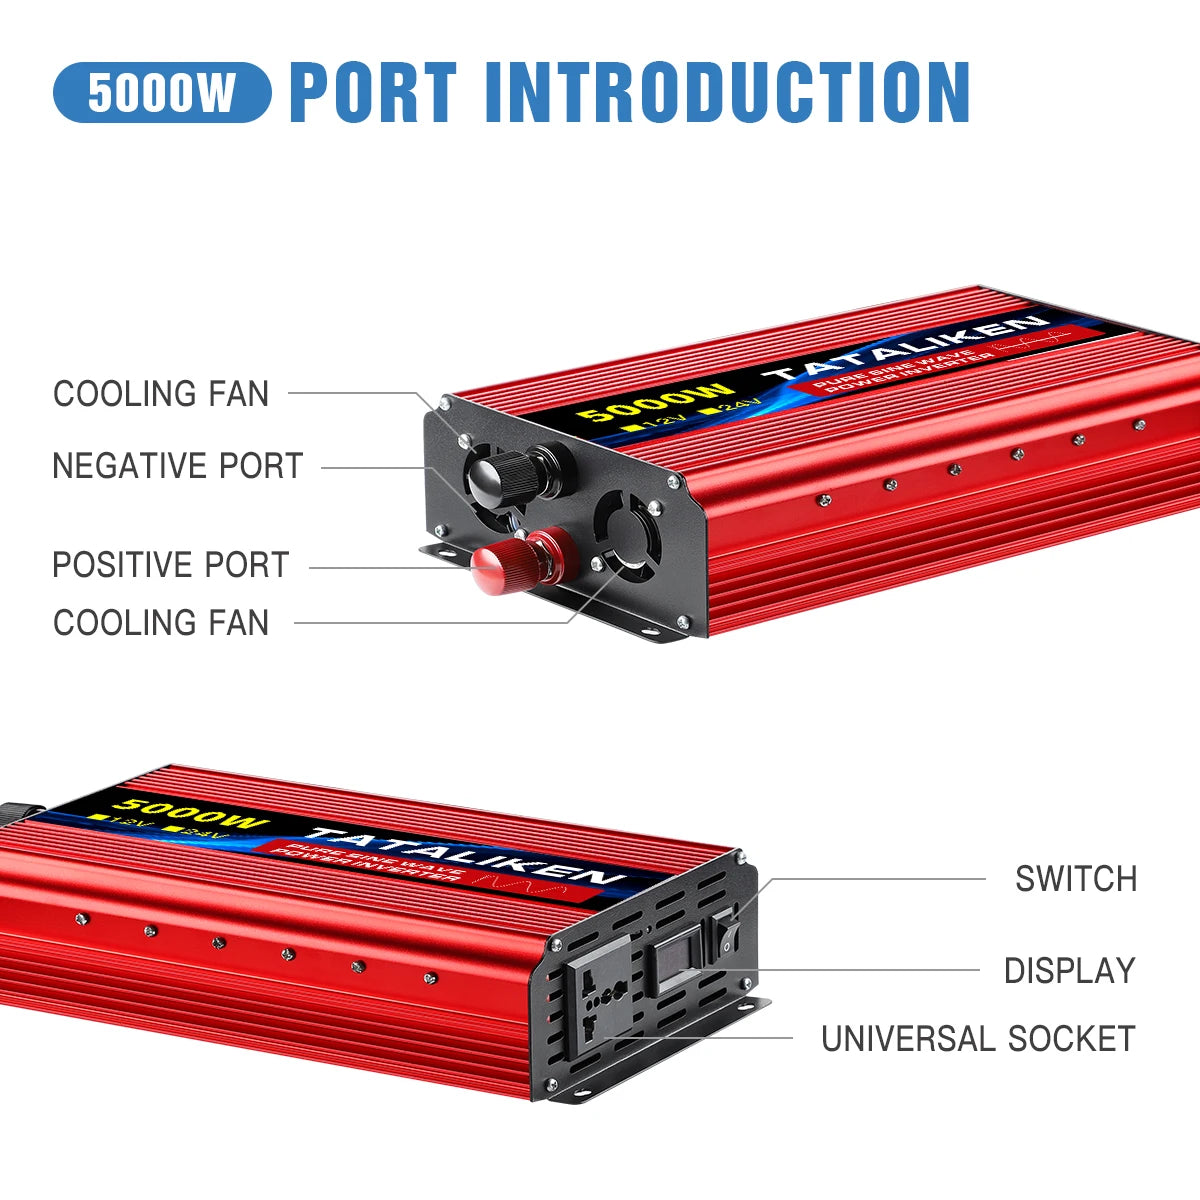 Pure sine wave inverter converts DC power to AC power with features like LED display, cooling fan, and universal socket.